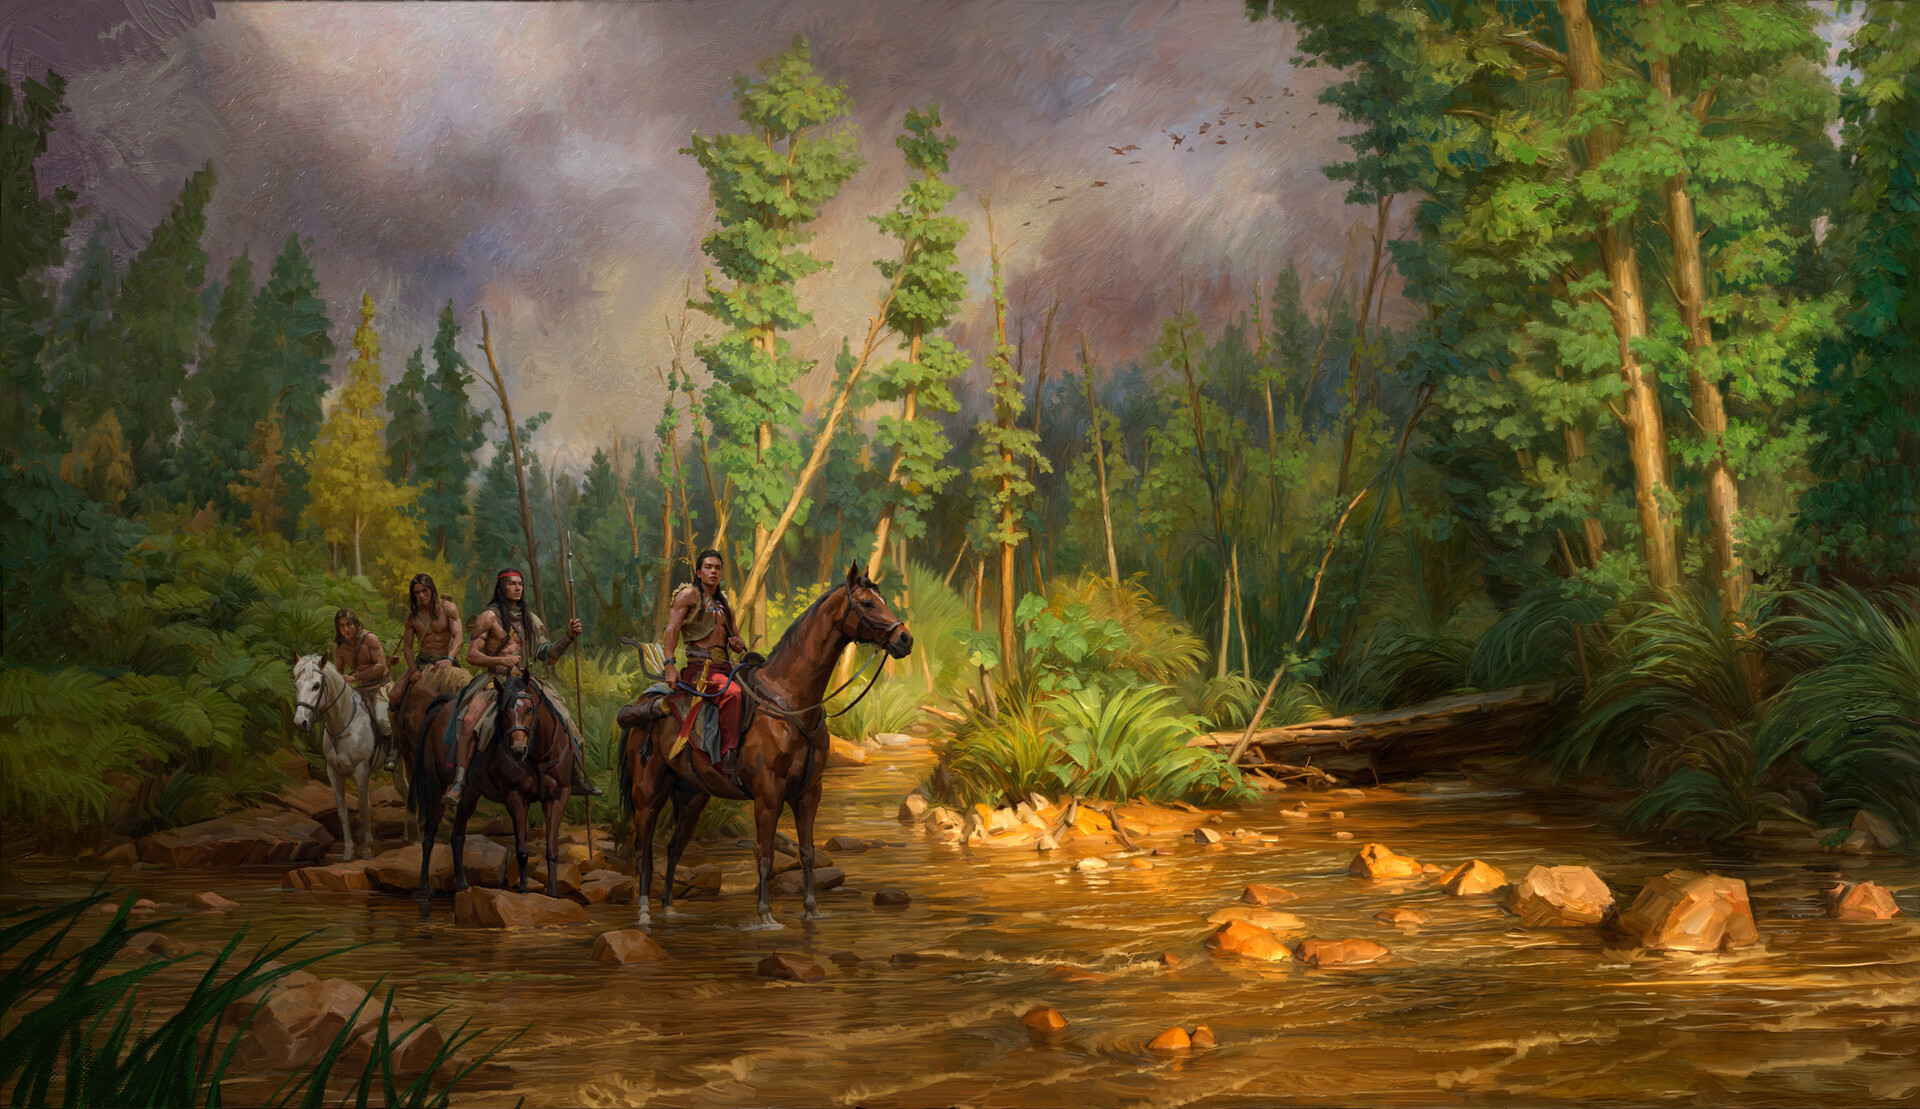 Wild Deer Native Americans Nature Painting Horse Riding Stones 1920x1109